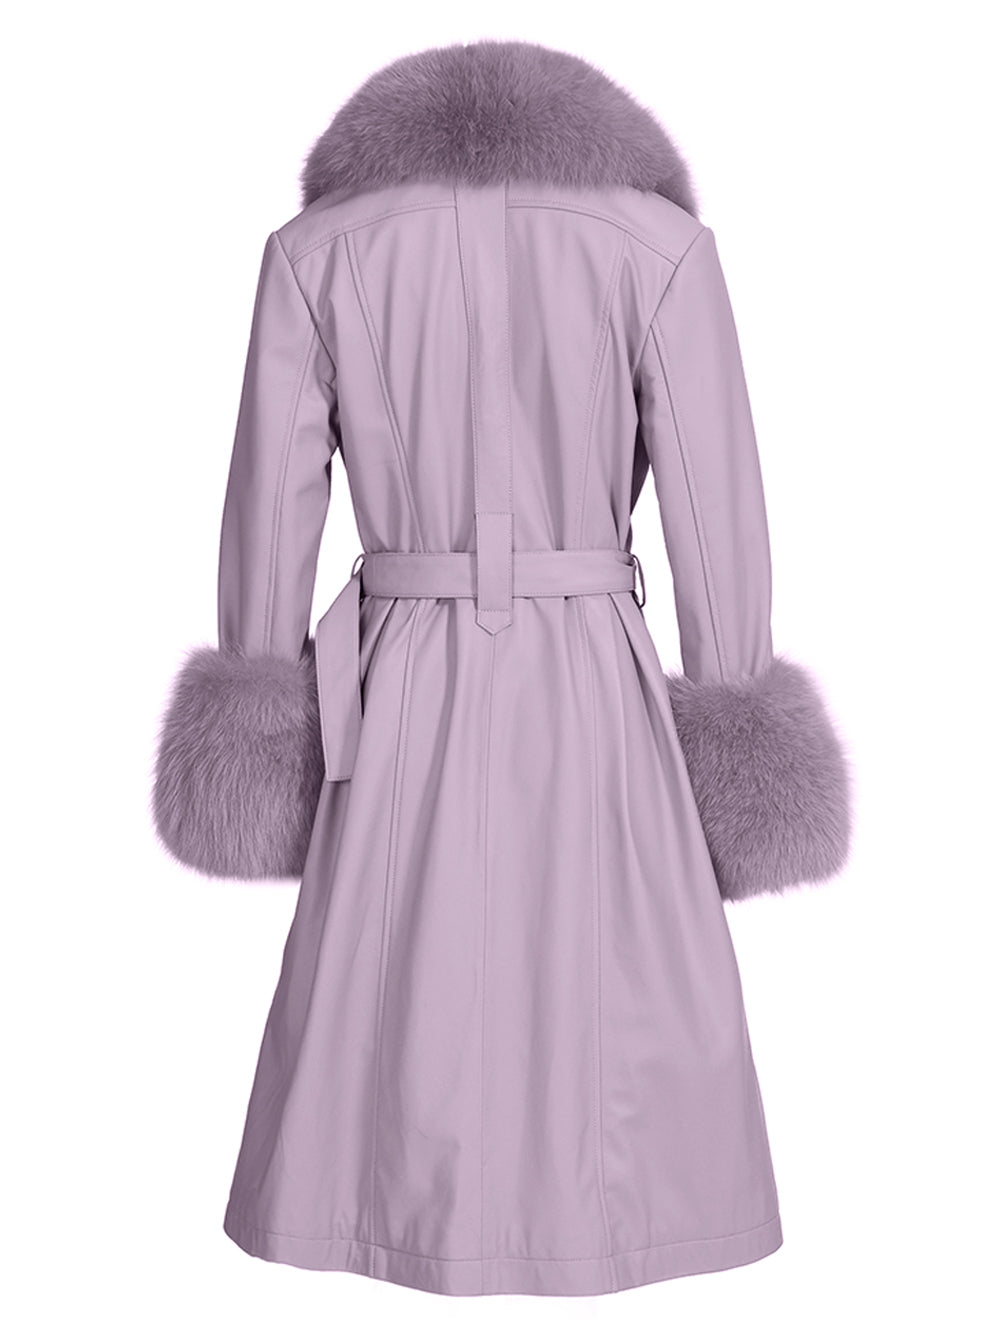 Faux Fur Genuine Leather Coat in Pink